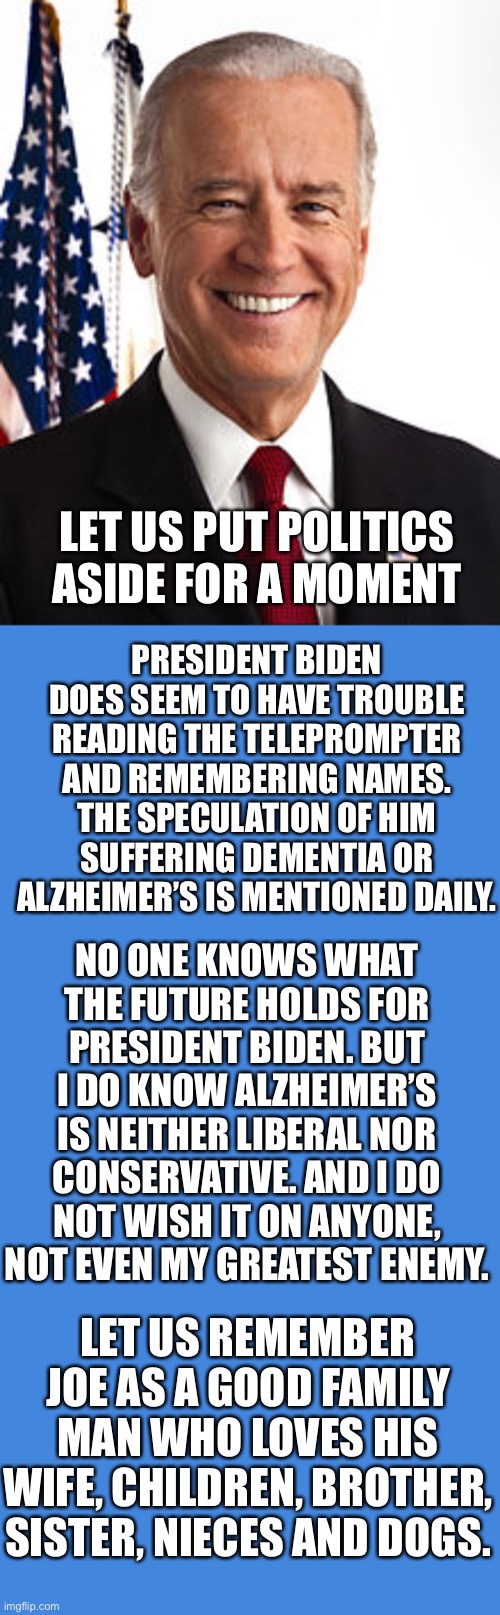 Let us put politics aside for a moment. | LET US PUT POLITICS ASIDE FOR A MOMENT; PRESIDENT BIDEN DOES SEEM TO HAVE TROUBLE READING THE TELEPROMPTER AND REMEMBERING NAMES. THE SPECULATION OF HIM SUFFERING DEMENTIA OR ALZHEIMER’S IS MENTIONED DAILY. NO ONE KNOWS WHAT THE FUTURE HOLDS FOR PRESIDENT BIDEN. BUT I DO KNOW ALZHEIMER’S IS NEITHER LIBERAL NOR CONSERVATIVE. AND I DO NOT WISH IT ON ANYONE, NOT EVEN MY GREATEST ENEMY. LET US REMEMBER JOE AS A GOOD FAMILY MAN WHO LOVES HIS WIFE, CHILDREN, BROTHER, SISTER, NIECES AND DOGS. | image tagged in president joe biden,family man,remember | made w/ Imgflip meme maker